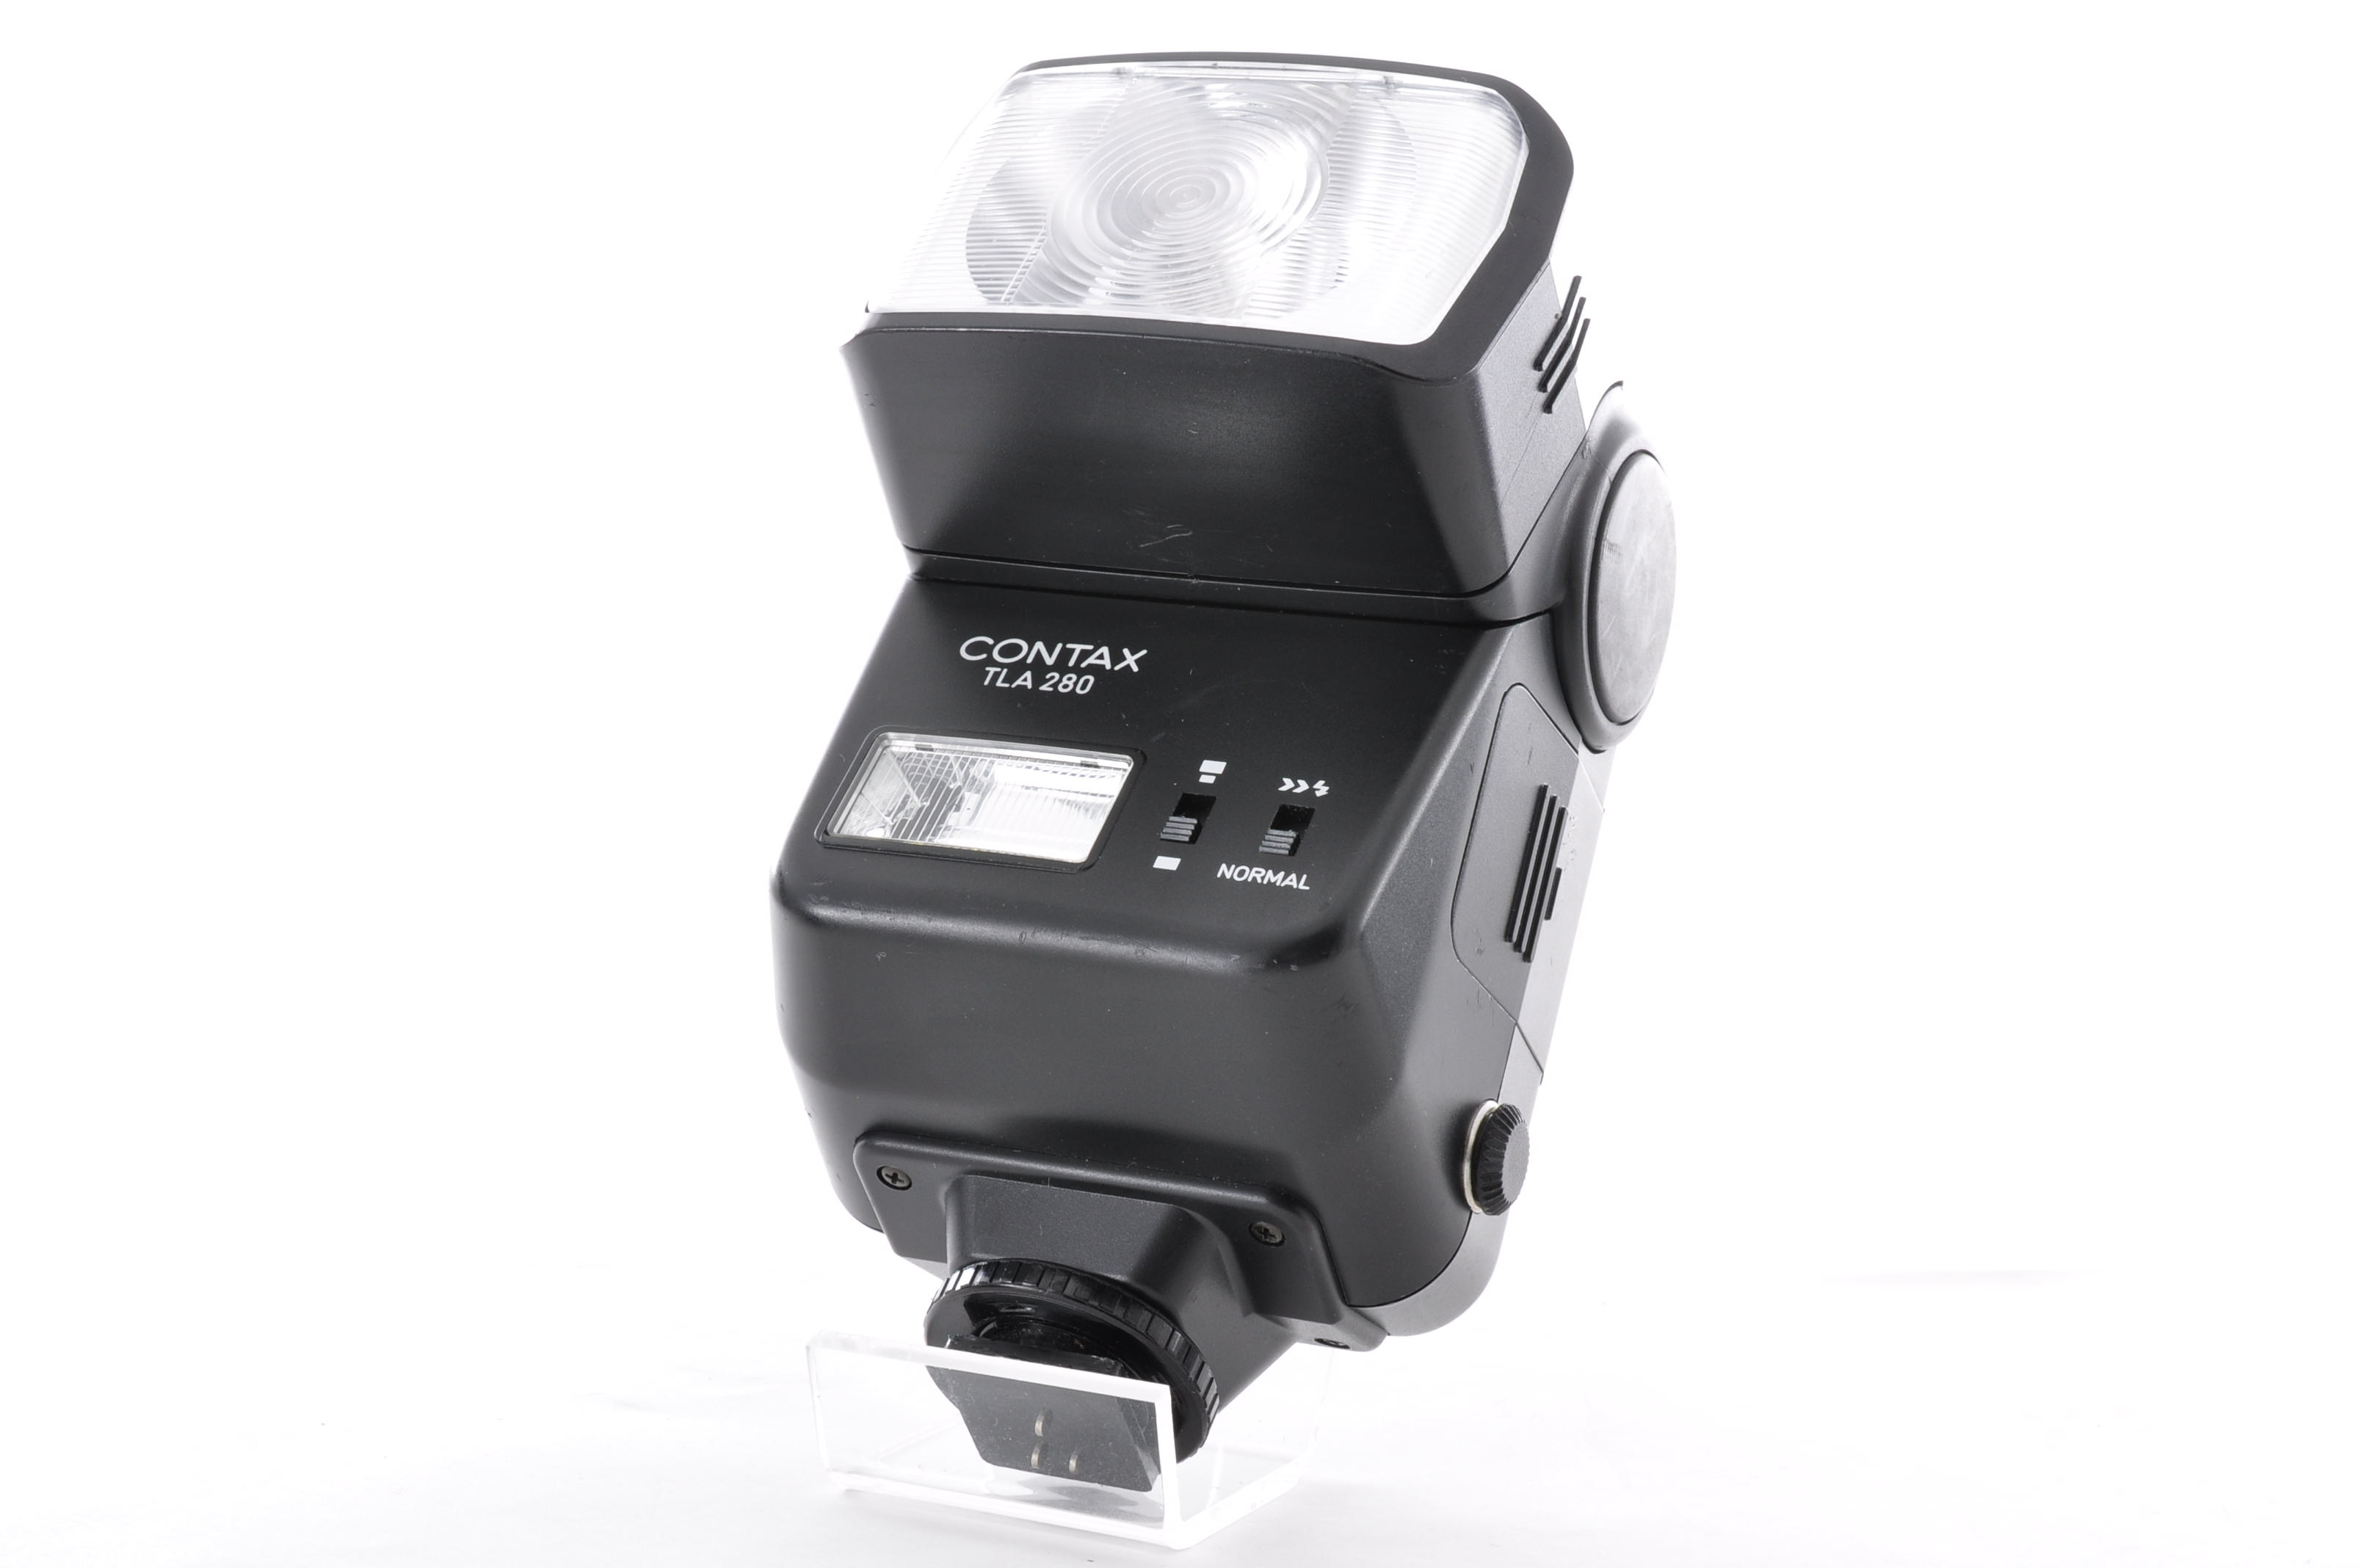 [Excellent] Contax TLA 280 Shoe Mount Flash For Contax SLR From Japan img01